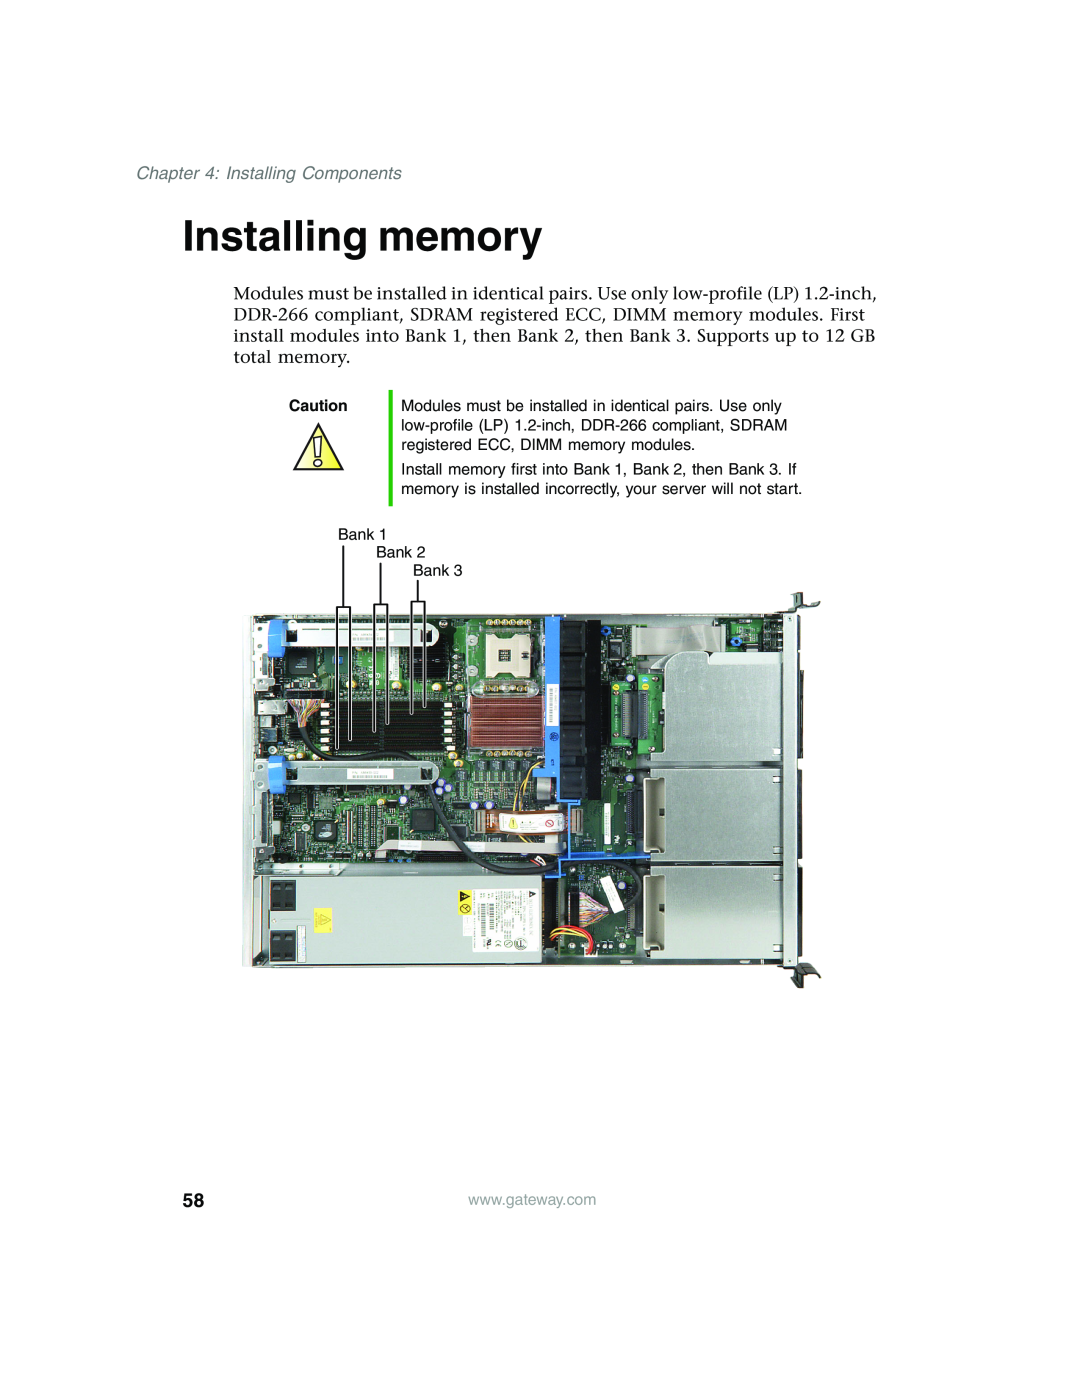 Gateway 955 manual Installing memory, Installing Components 